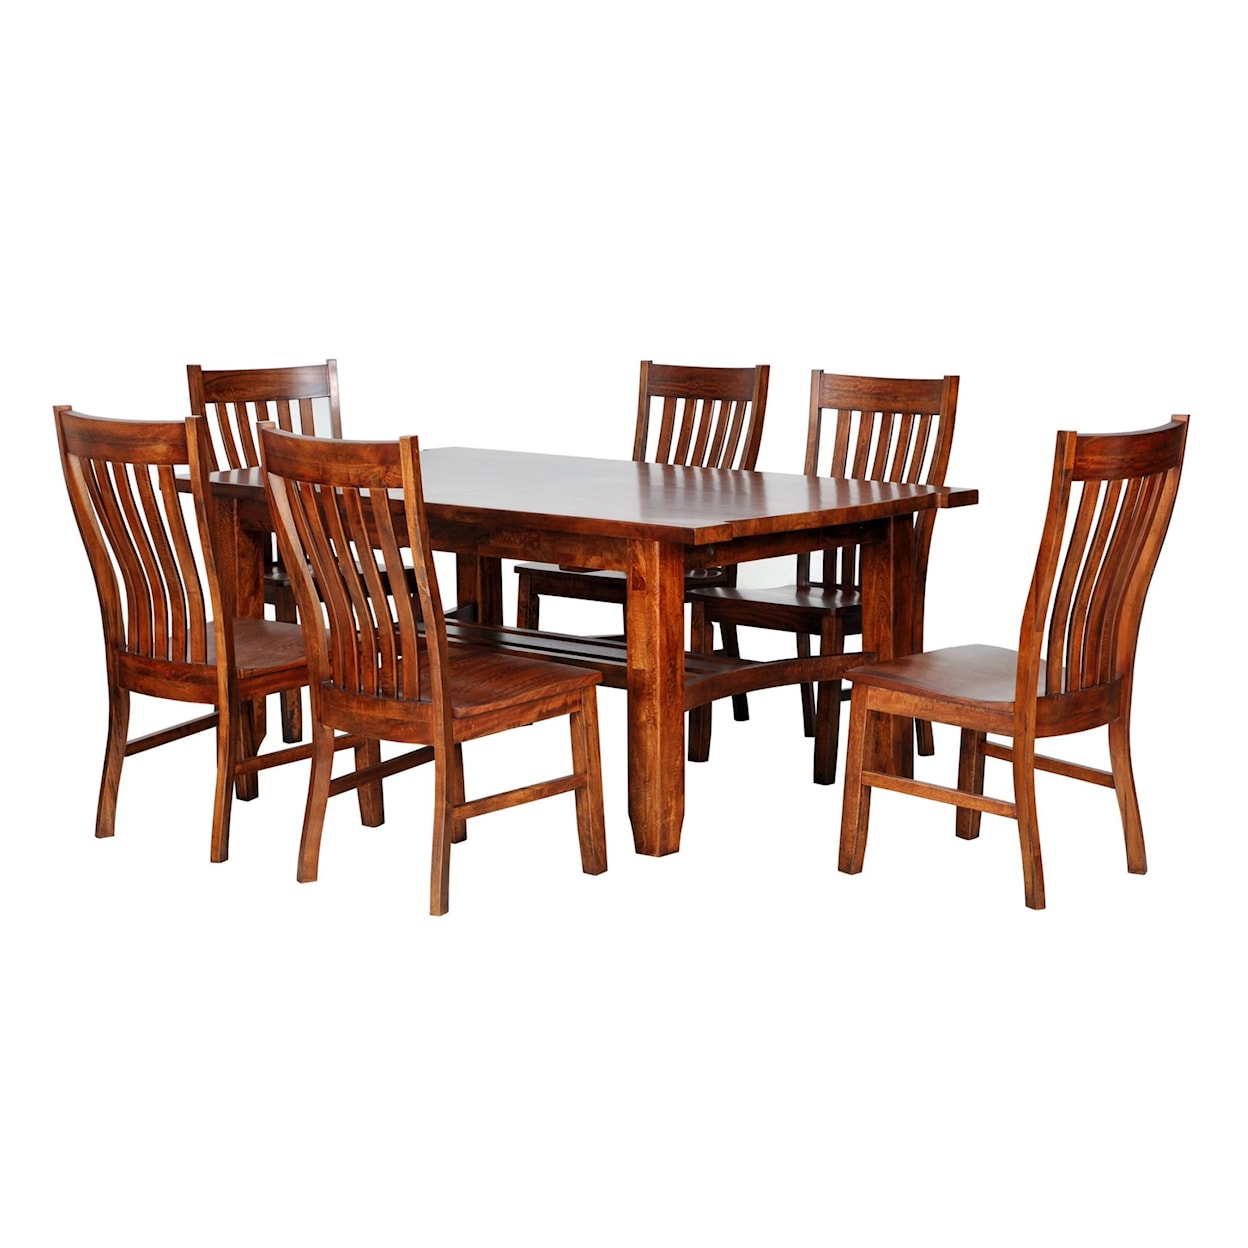 Virginia Furniture Market Solid Wood Whittier Dining Table